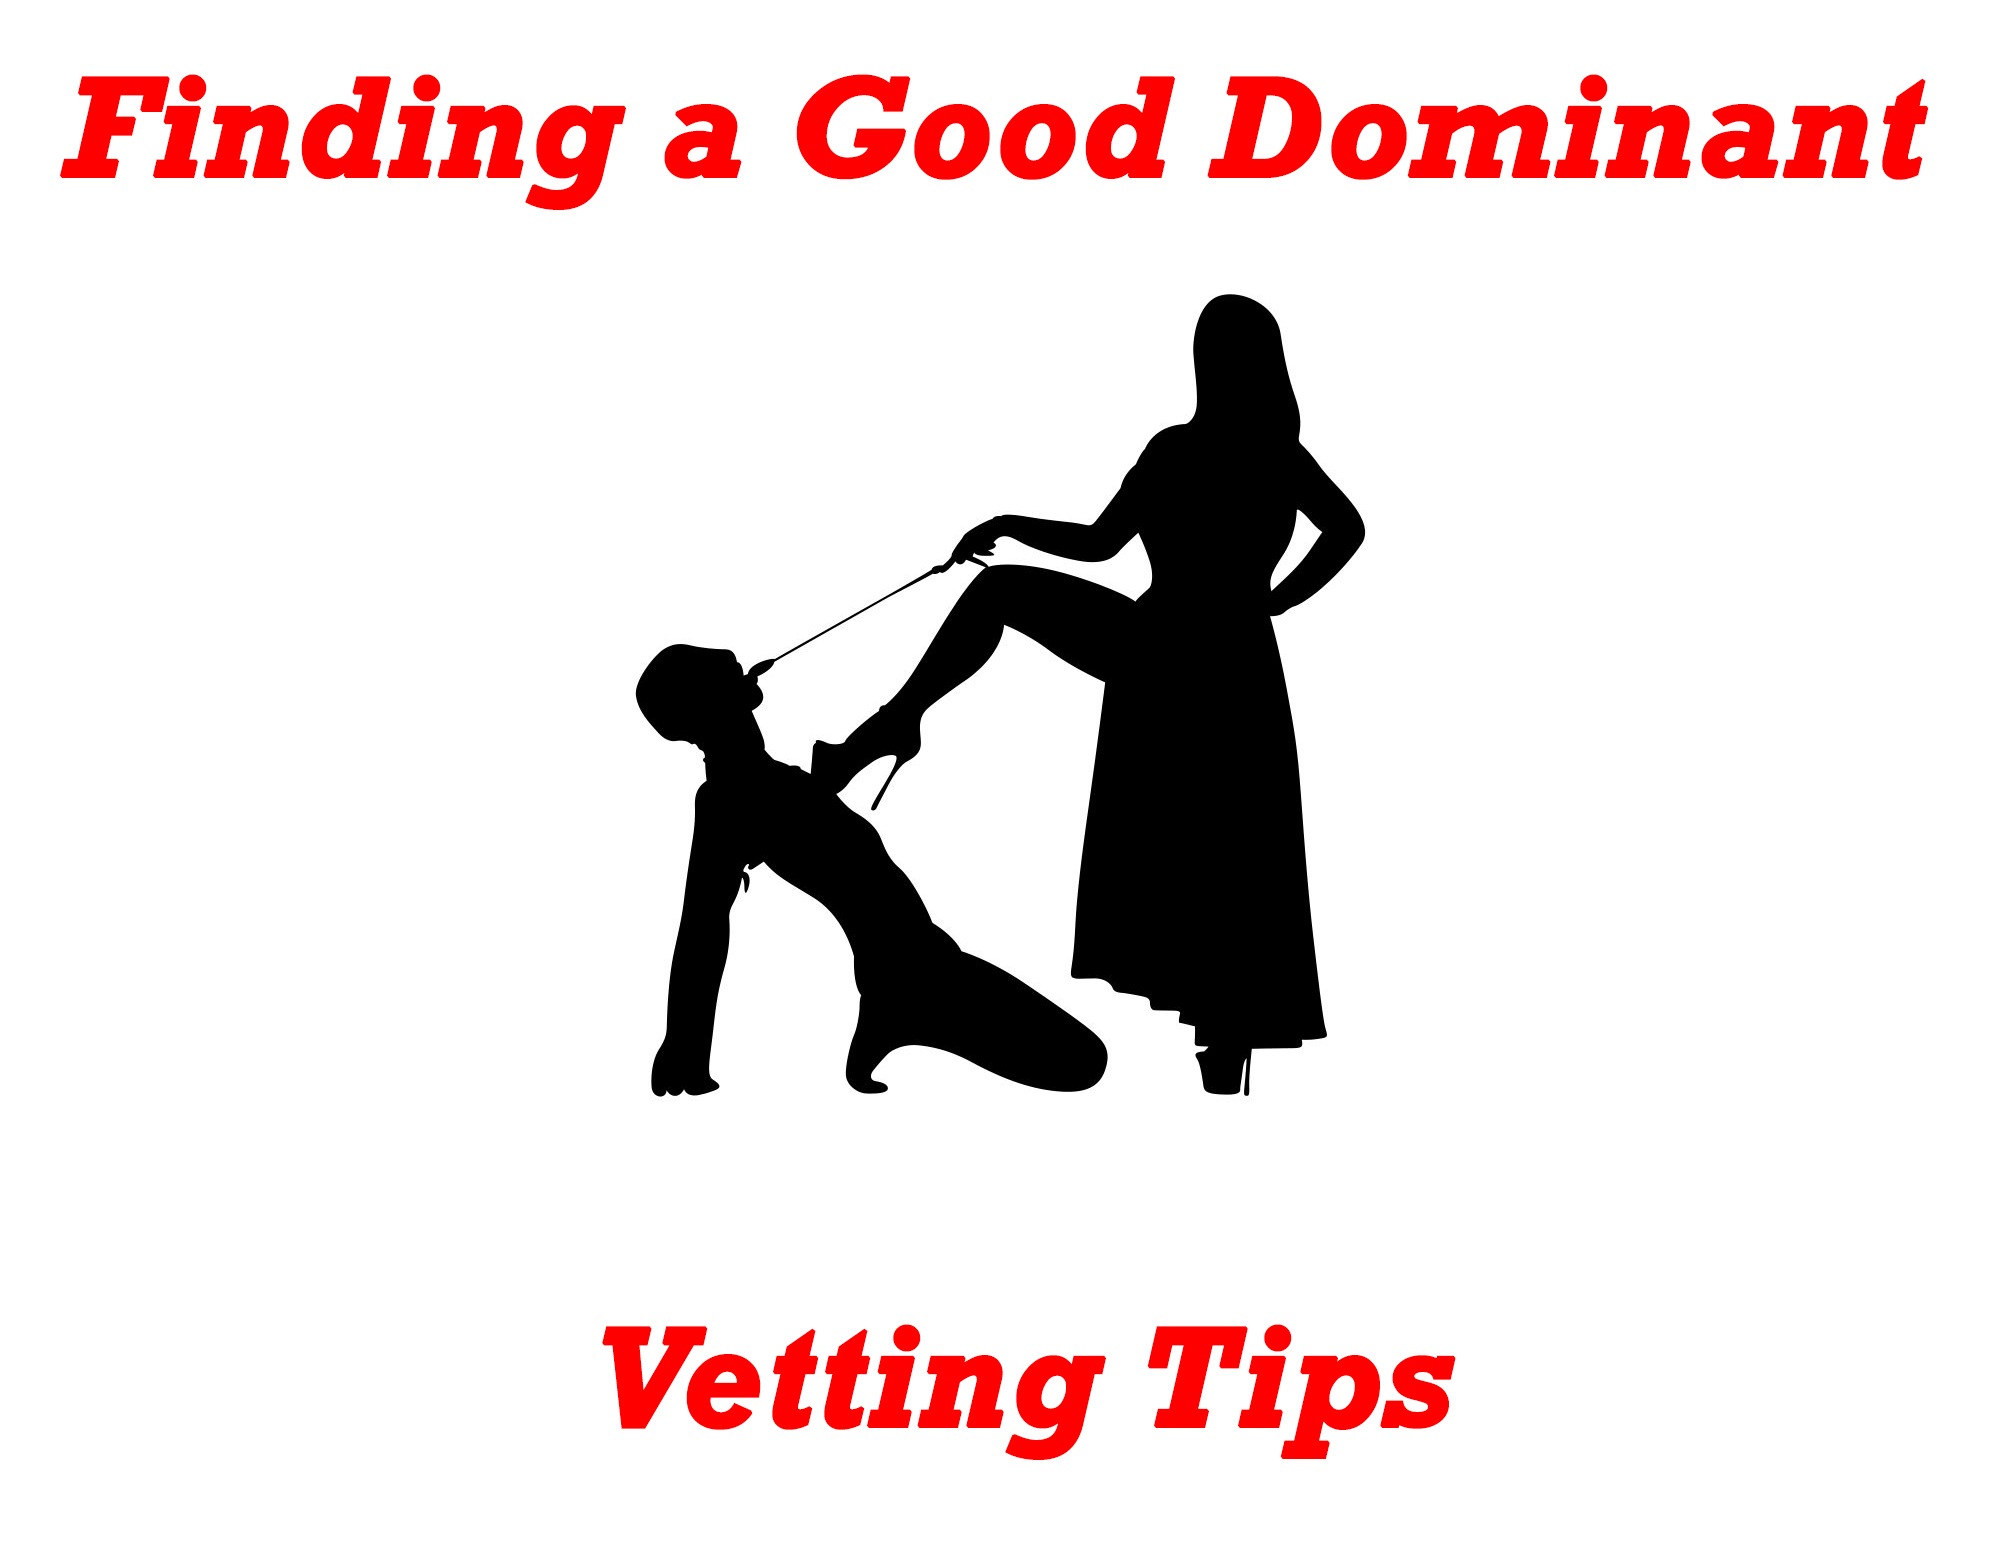 vetting tips - Finding the right Dominant for you : some vetting tips.